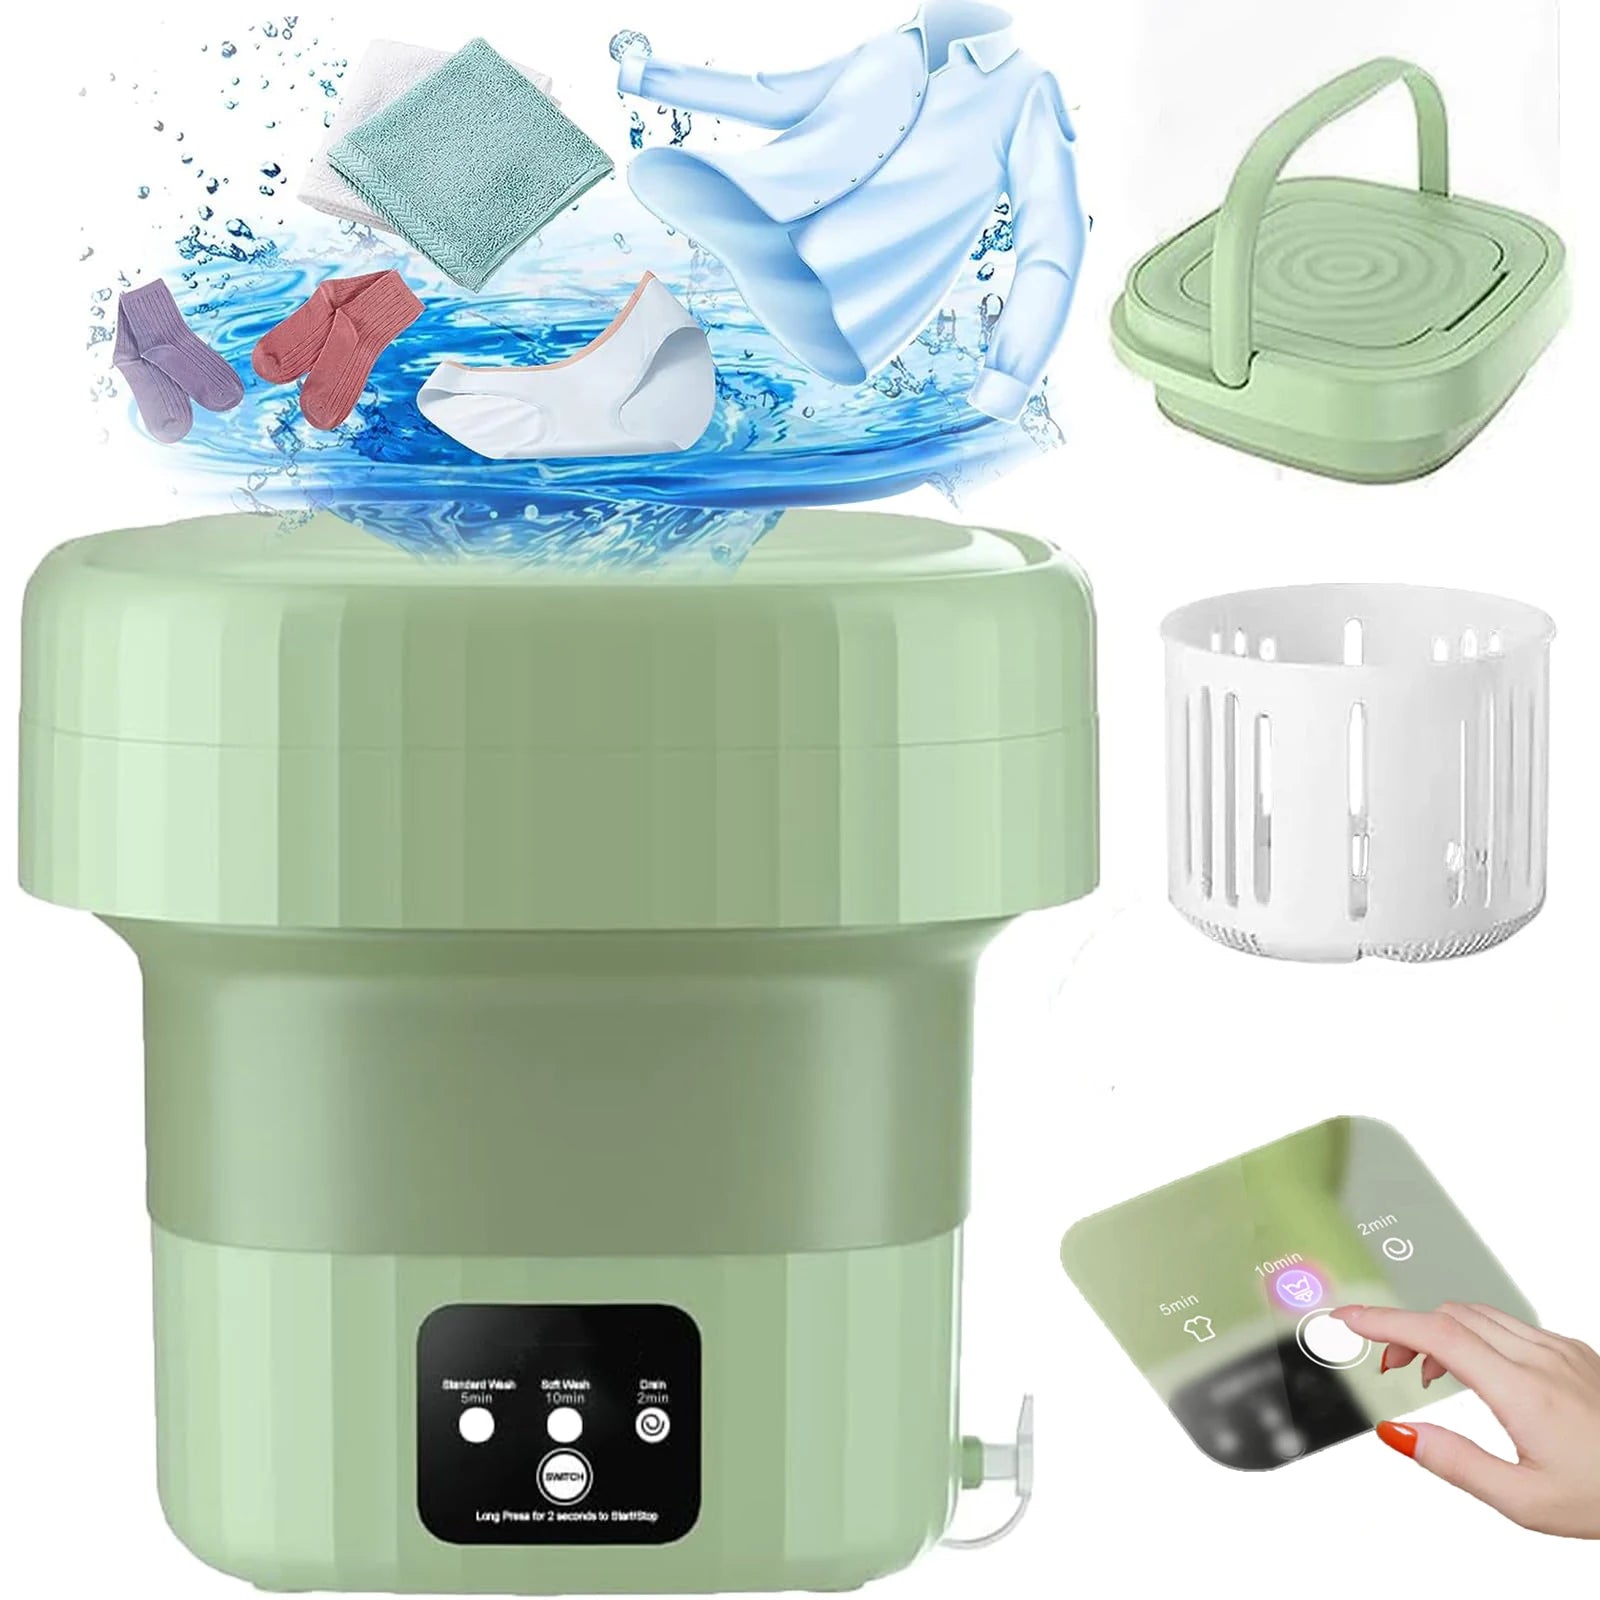 Portable Folding Washing Machine for Clothes with Drain Basket Dryer Feaction 3 Washing Modes for Underwear Baby Clothes